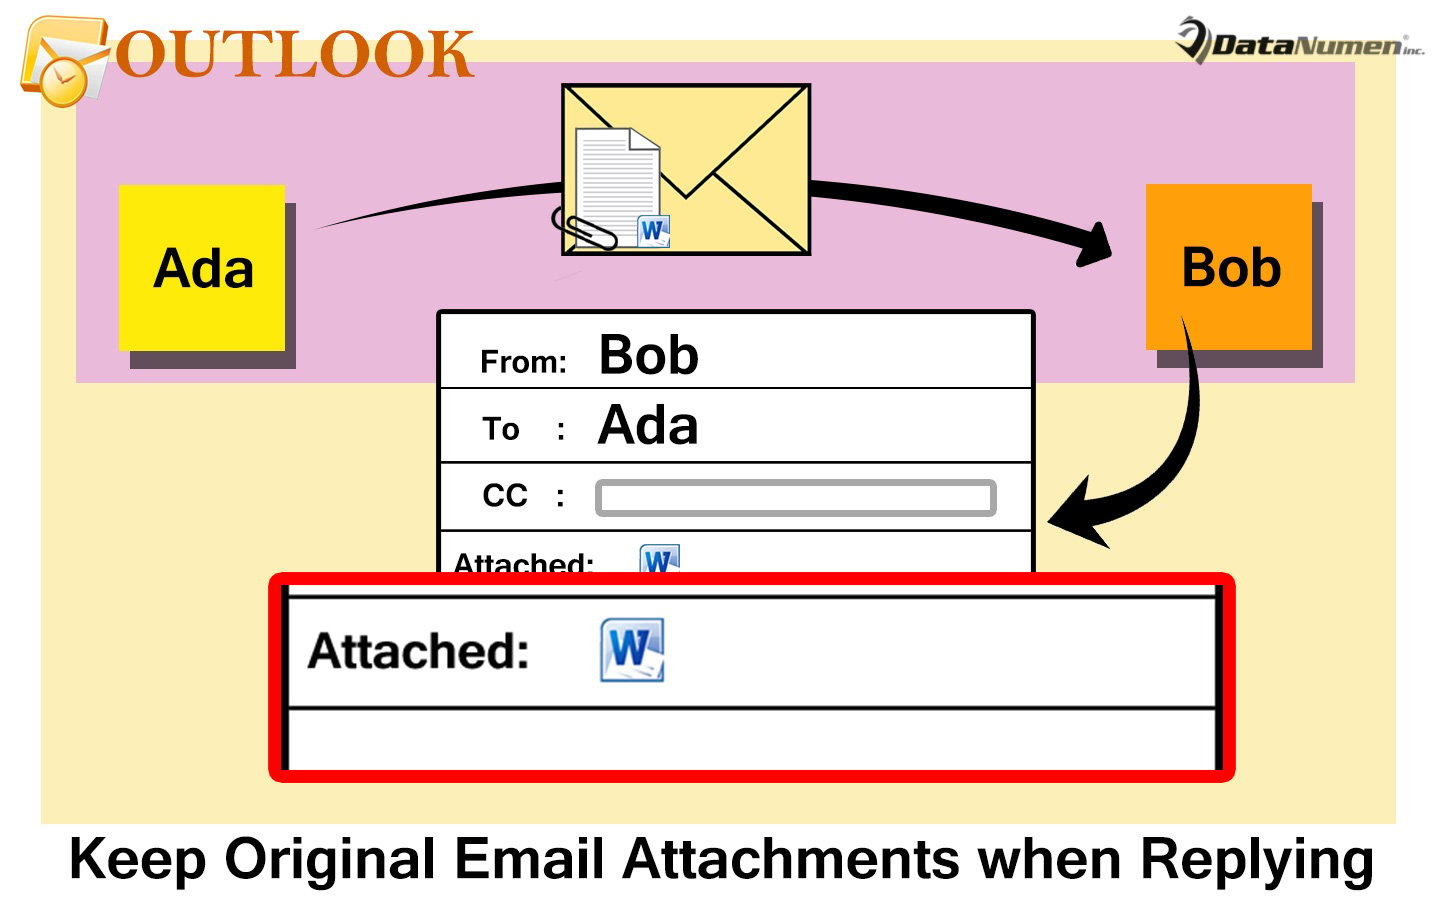 Keep the Original Email Attachments when Replying in Outlook